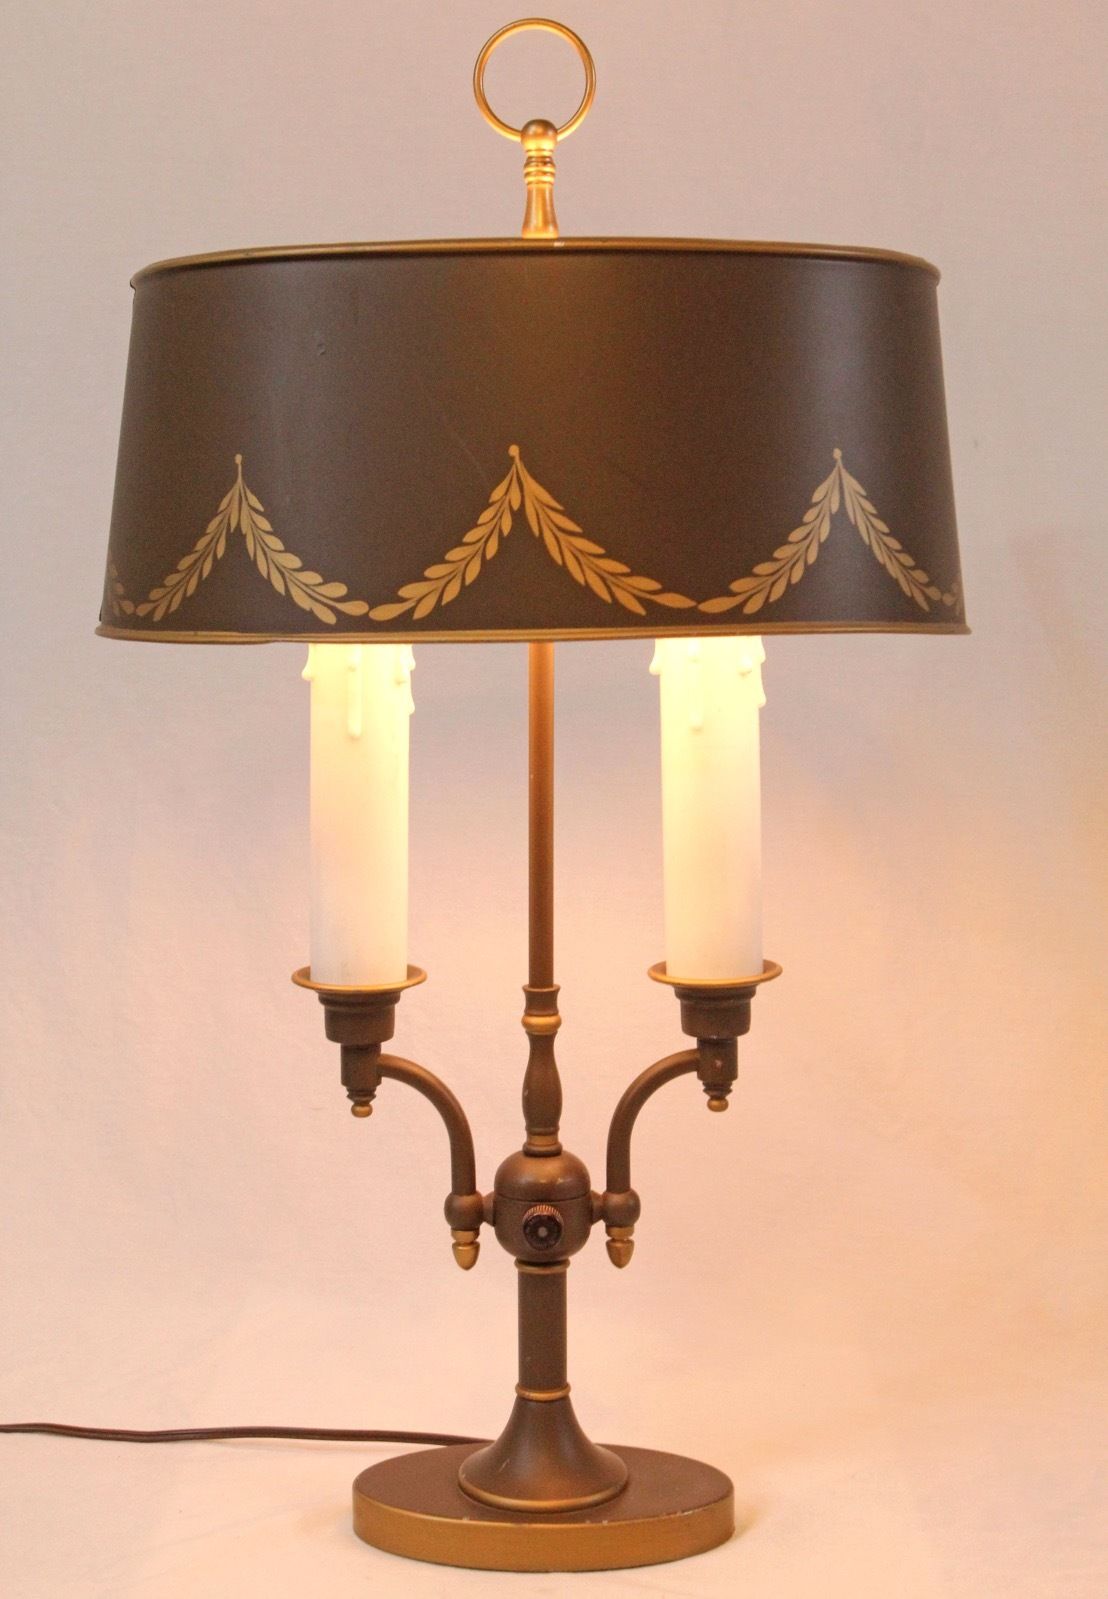 Bouillotte Tole Double Candlestick Table Lamp Vintage Painted Metal Shade Brown